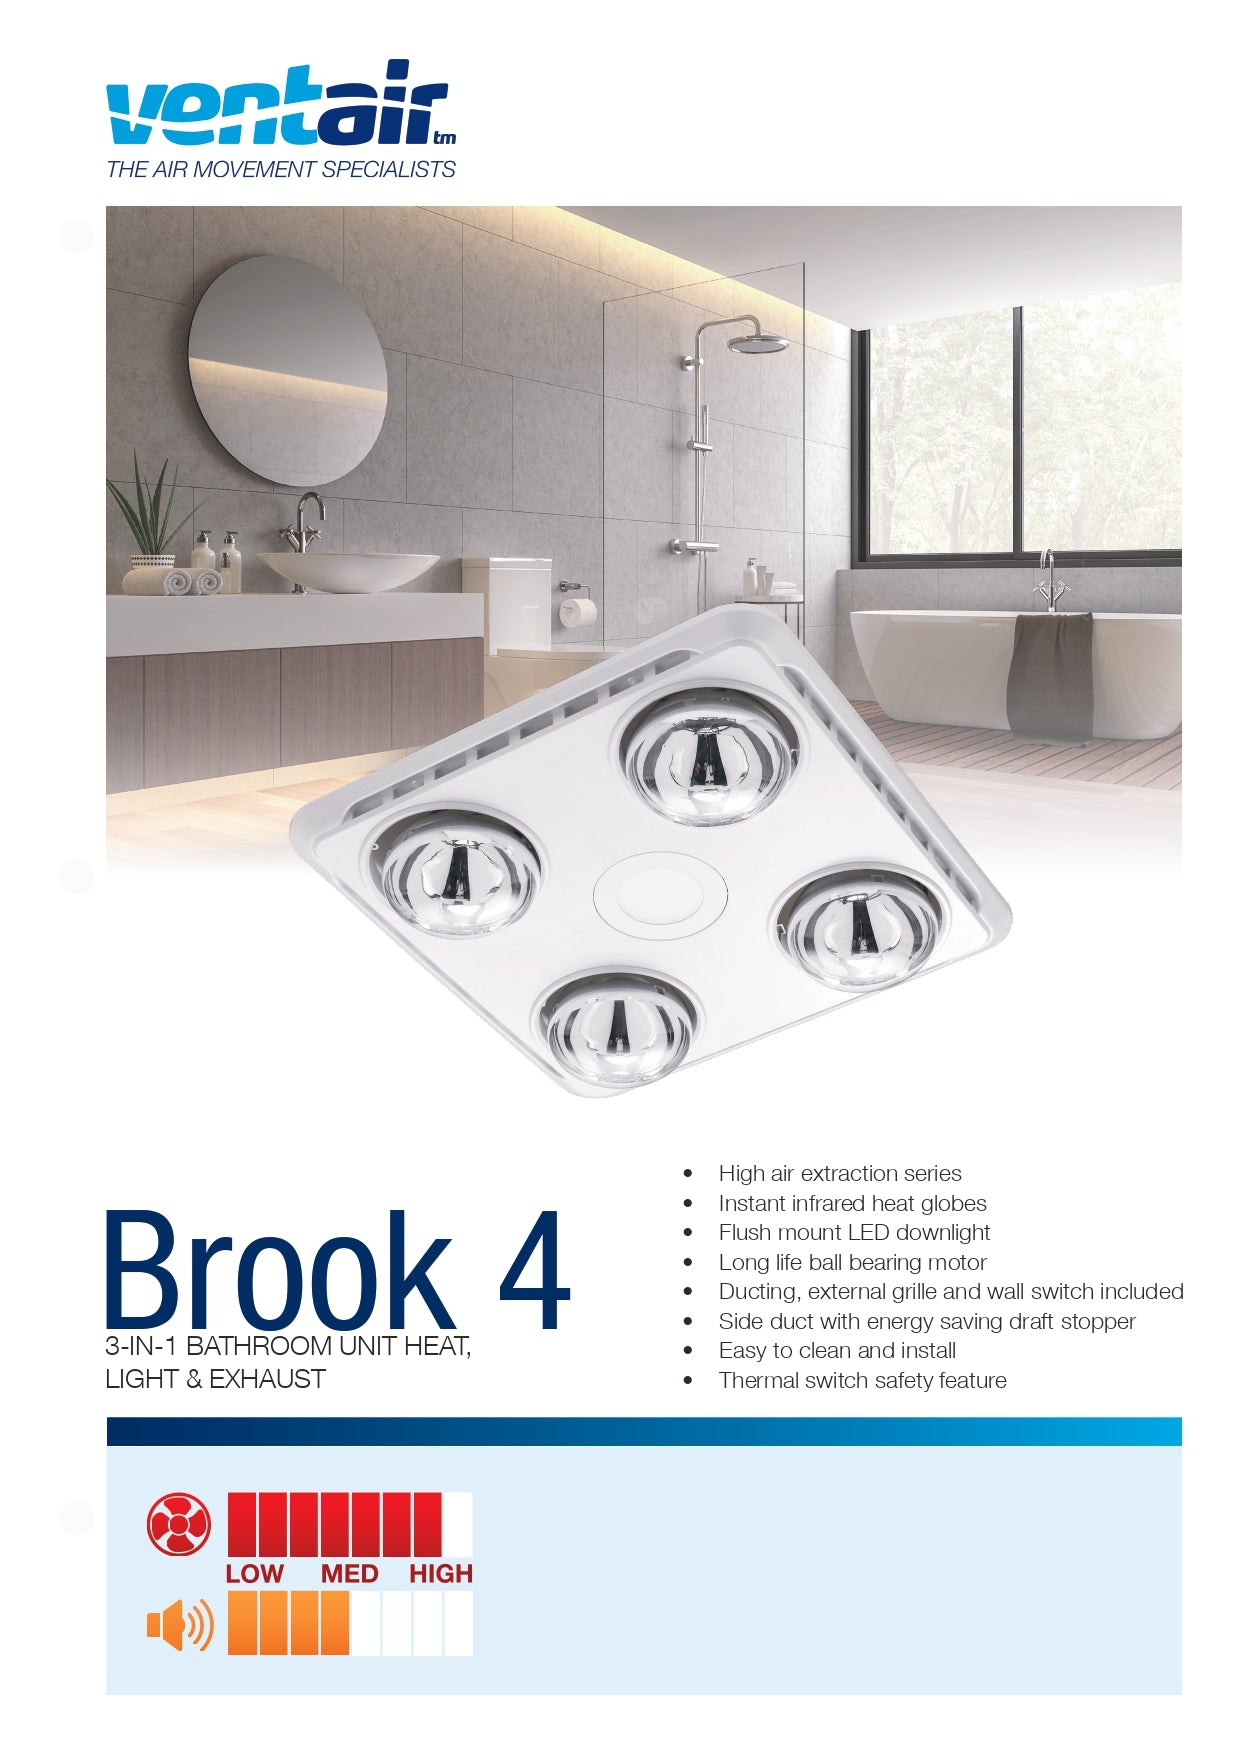 VENTAIR BROOK 4 HIGH EXTRACTION SERIES, 3 IN1 BATHROOM UNIT WITH 4 HEAT GLOBES, LED CENTRE DOWNLIGHT AND POWERFUL EXHAUST FAN WHITE